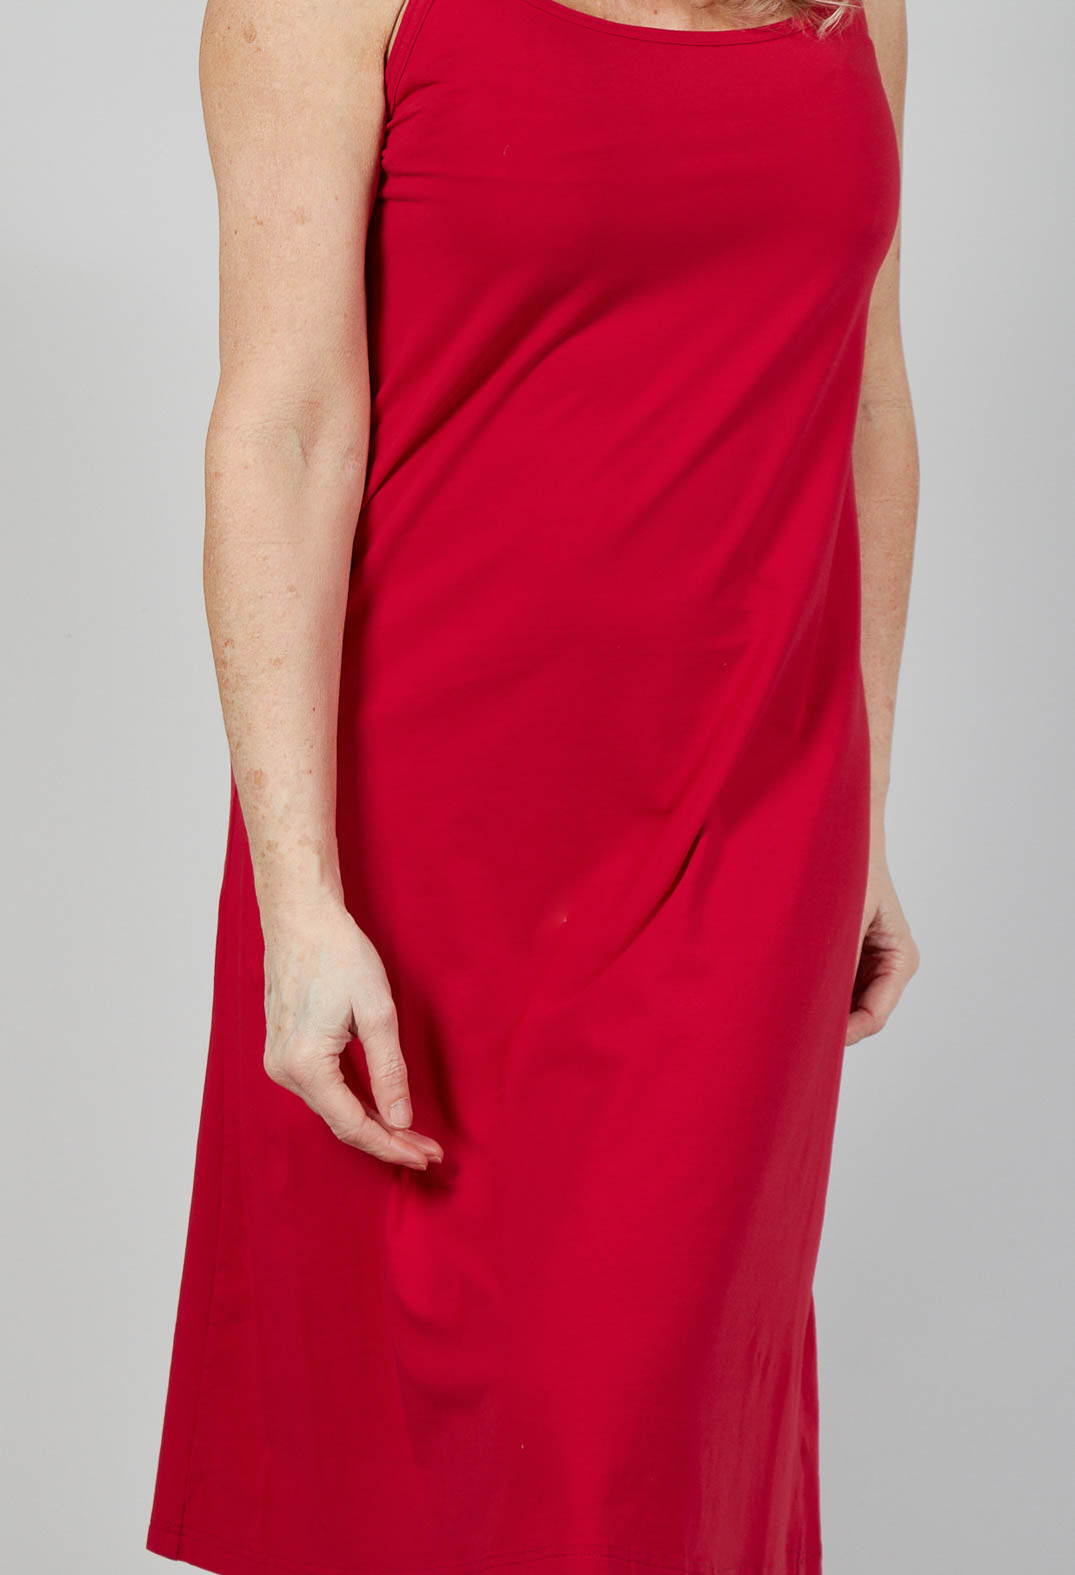 Cami Jersey Dress in Chili